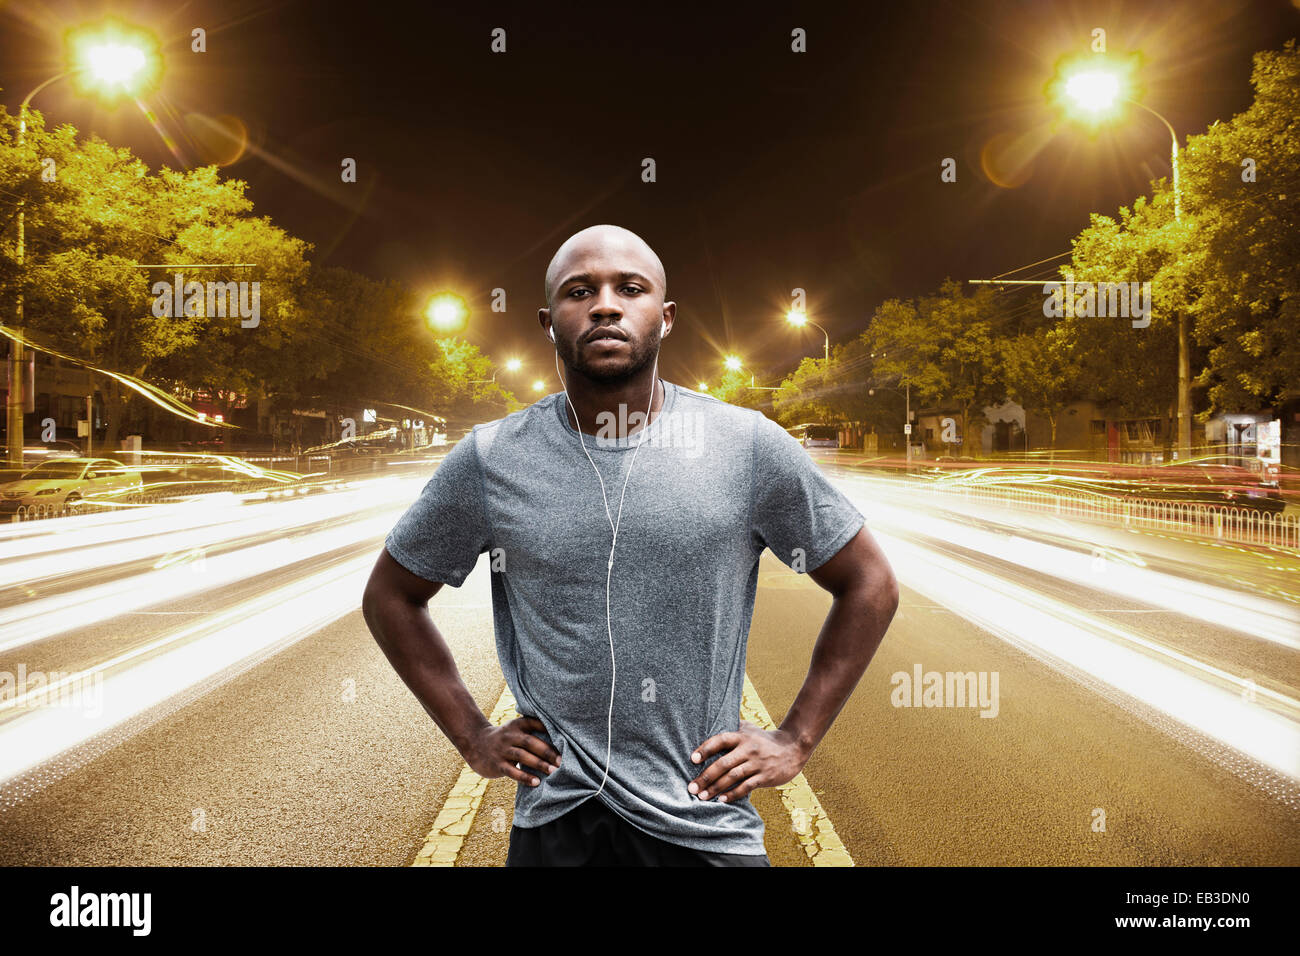 Time lapse view of Black runner standing on city street at night Stock Photo